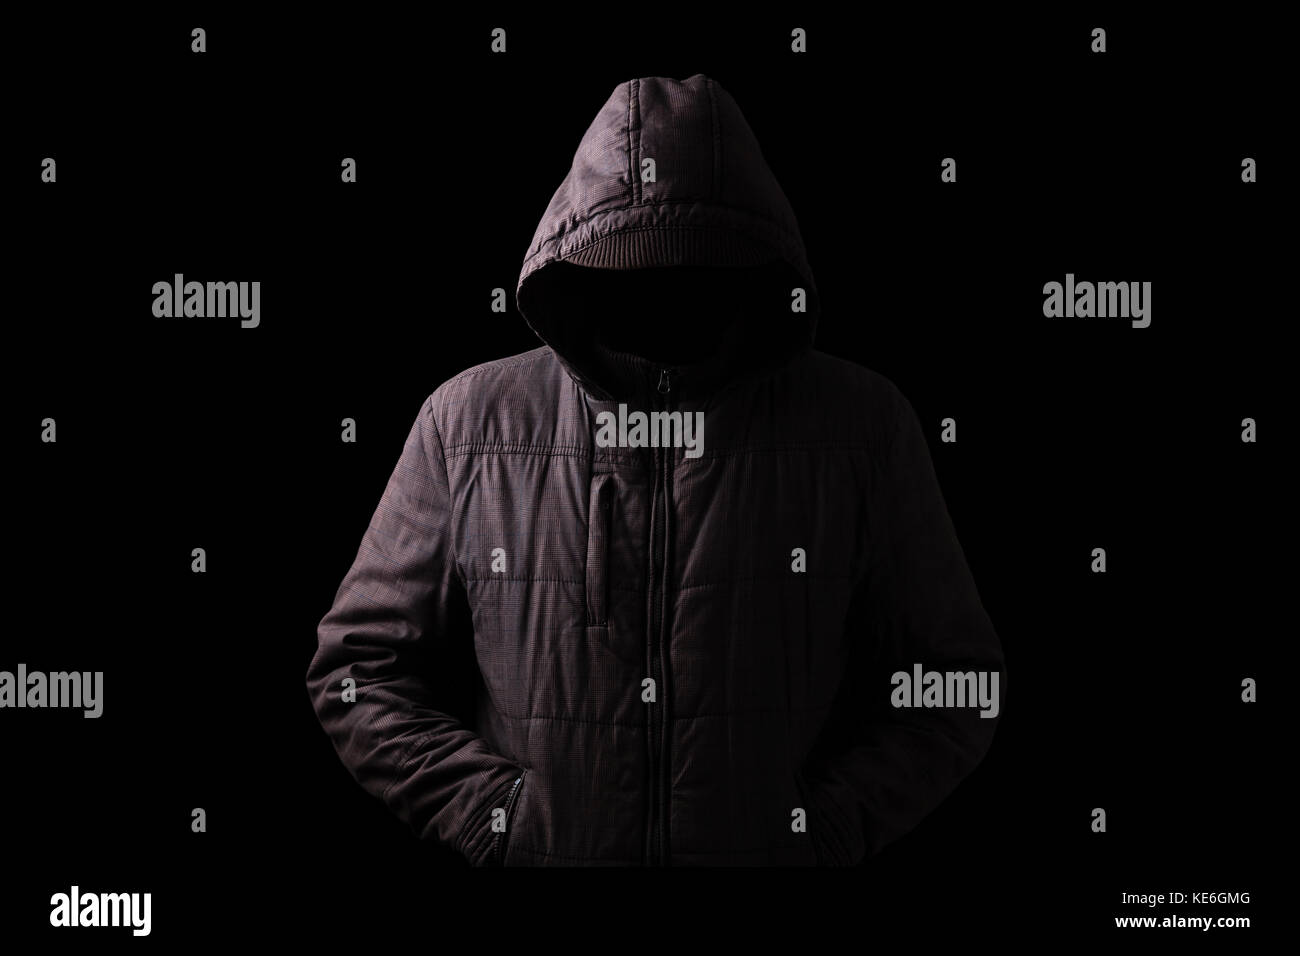 Scary and creepy man hiding in the shadows, standing in the darkness / black background hood hiding face shadows dangerous mysterious stalker hood Stock Photo